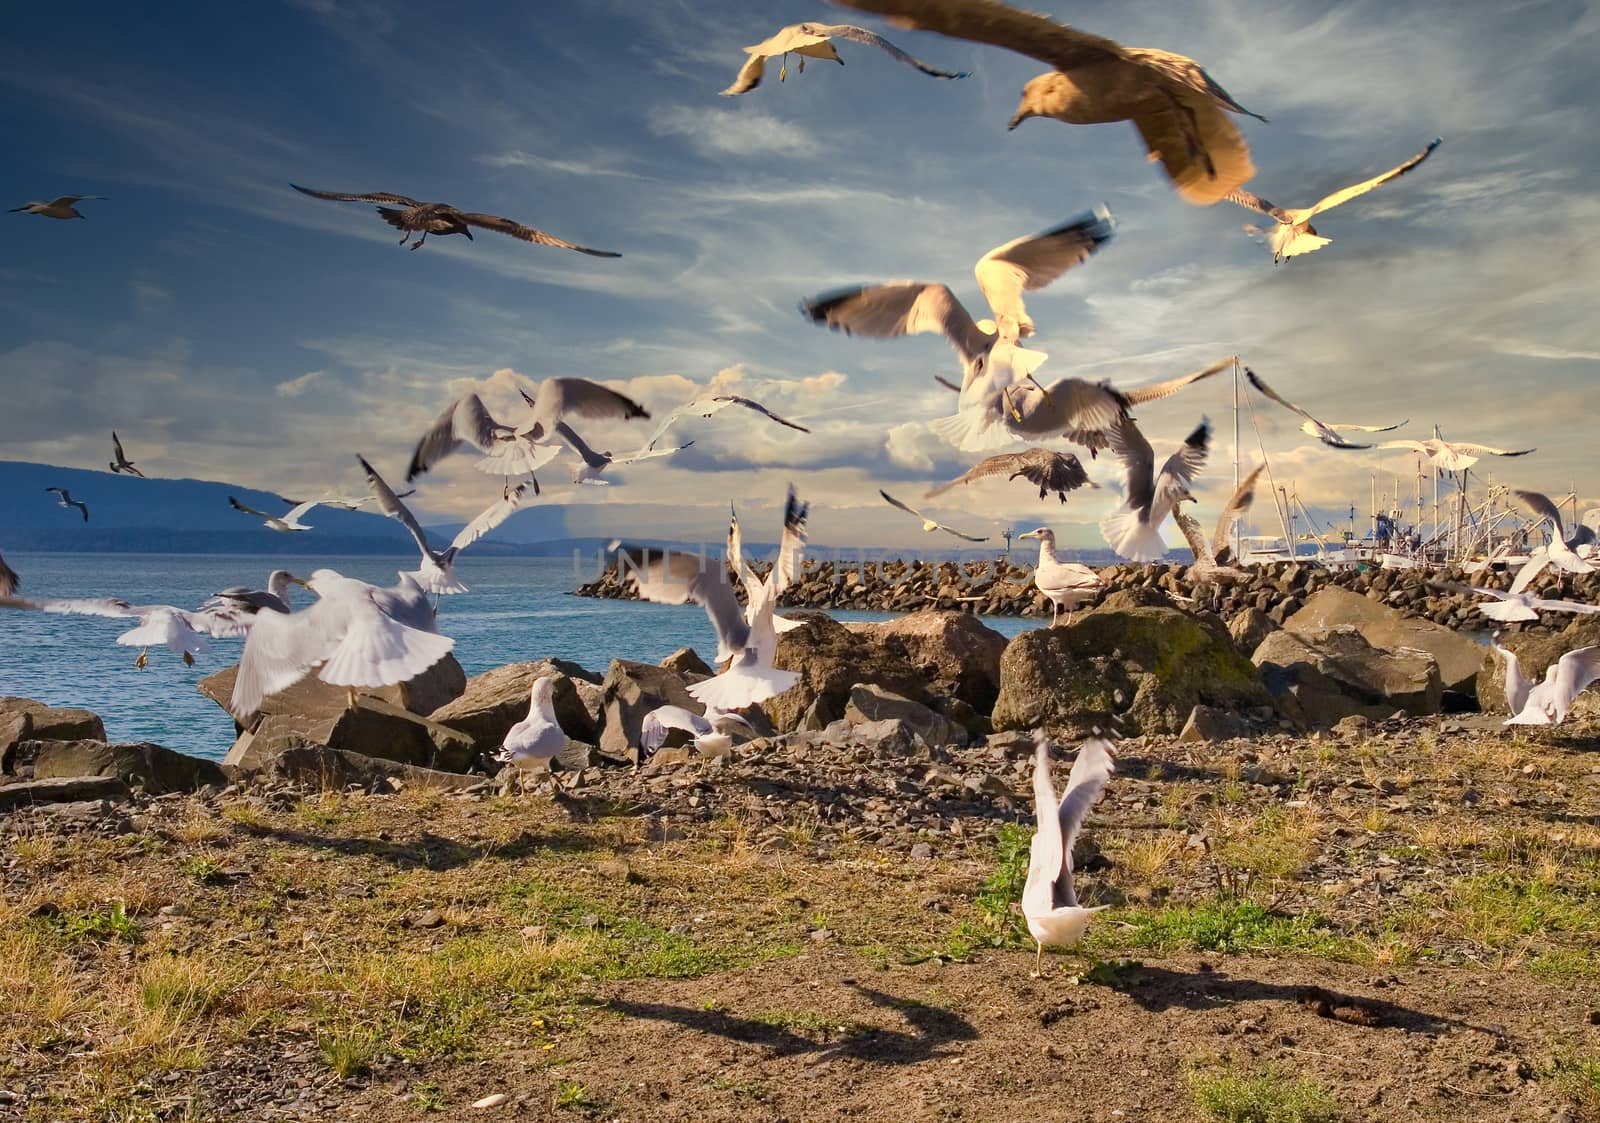 A large flock of seagulls hovering around a rocky coast